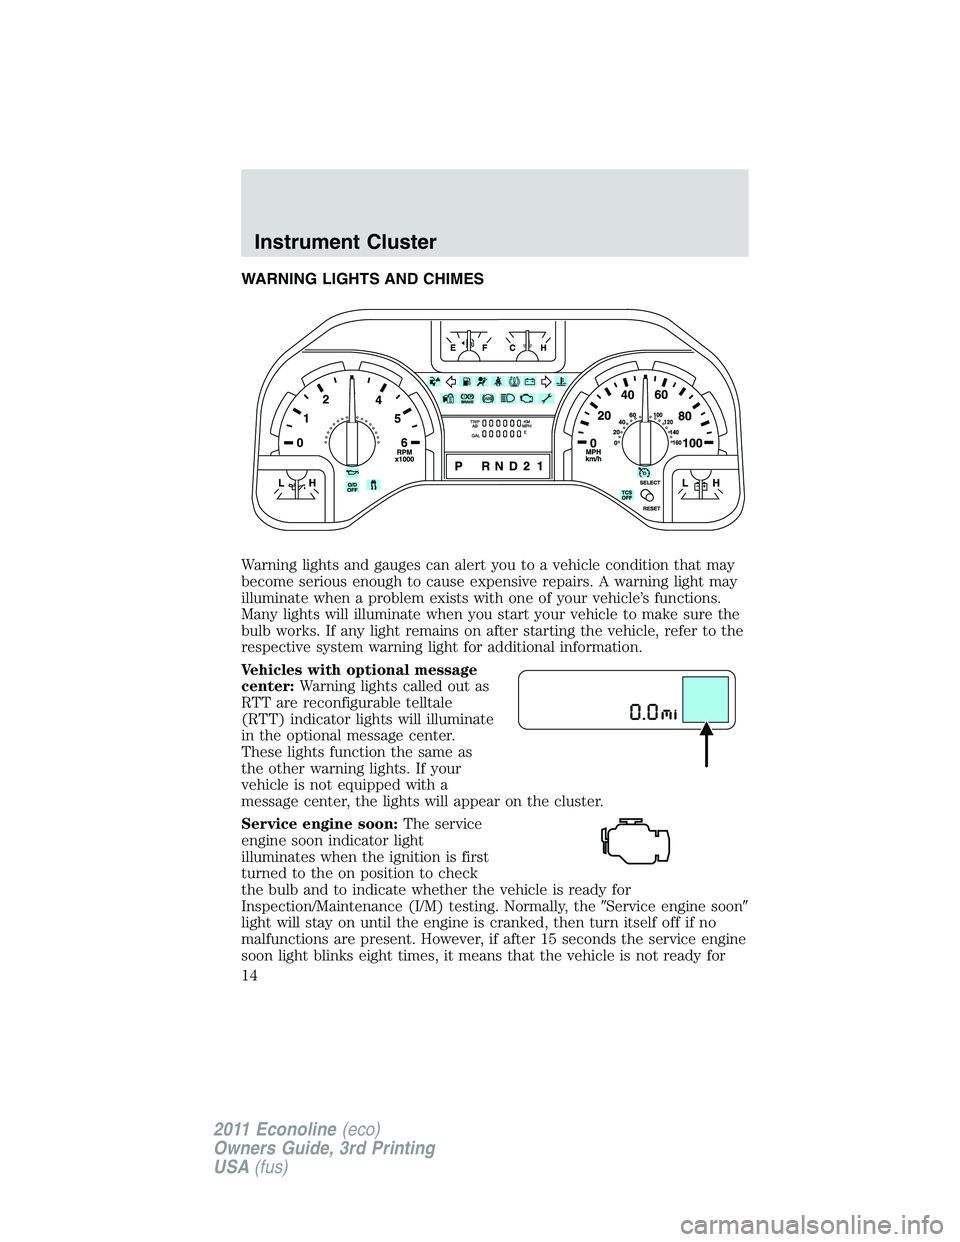 FORD E150 2011  Owners Manual WARNING LIGHTS AND CHIMES
Warning lights and gauges can alert you to a vehicle condition that may
become serious enough to cause expensive repairs. A warning light may
illuminate when a problem exists